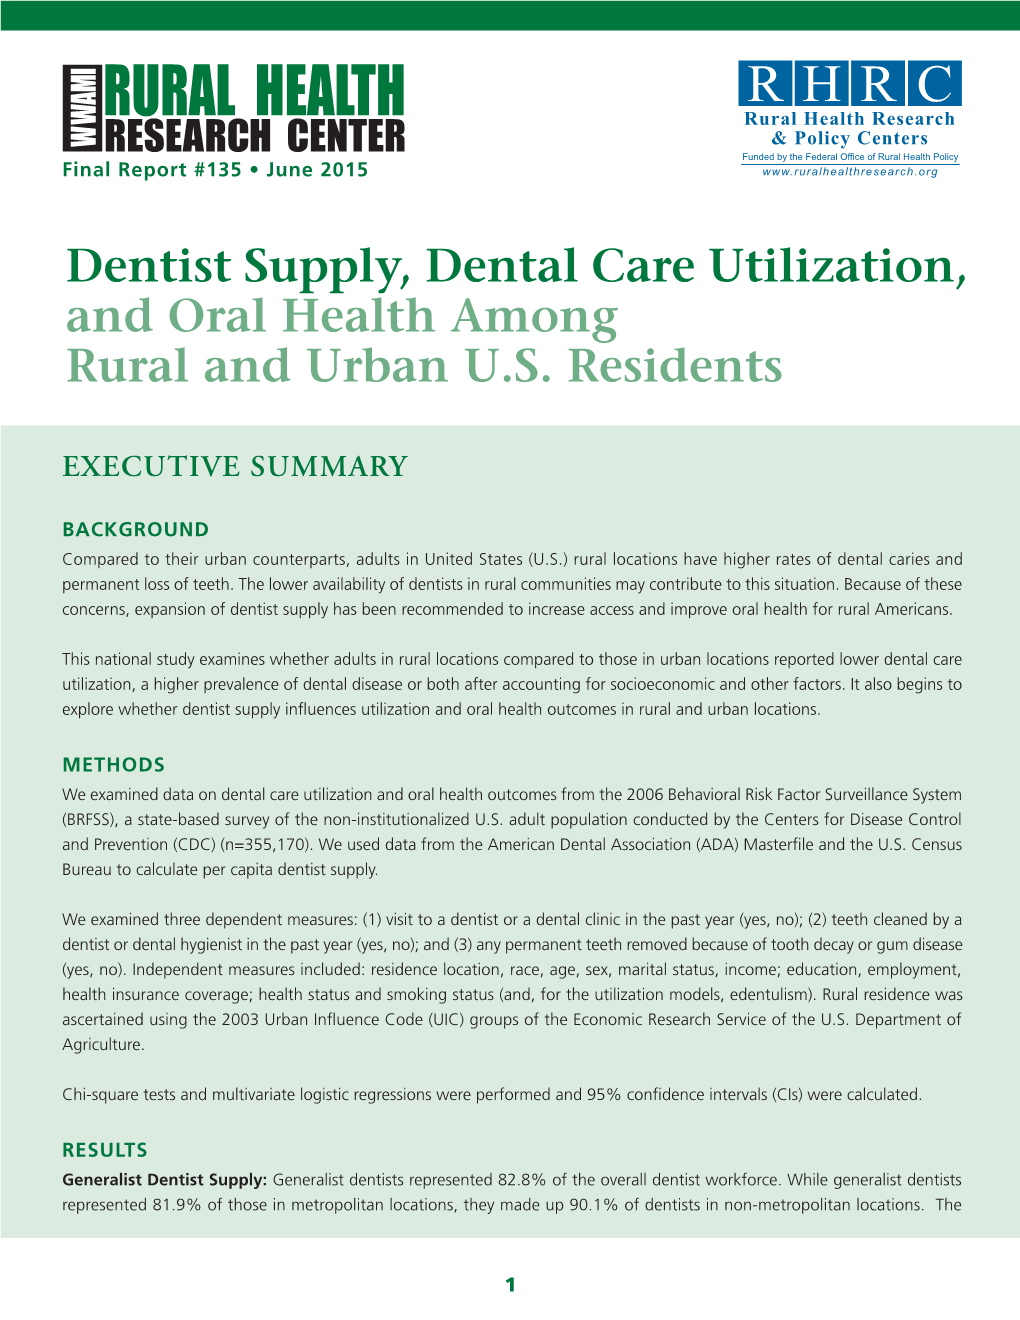 Dentist Supply, Dental Care Utilization, and Oral Health Among Rural and Urban U.S